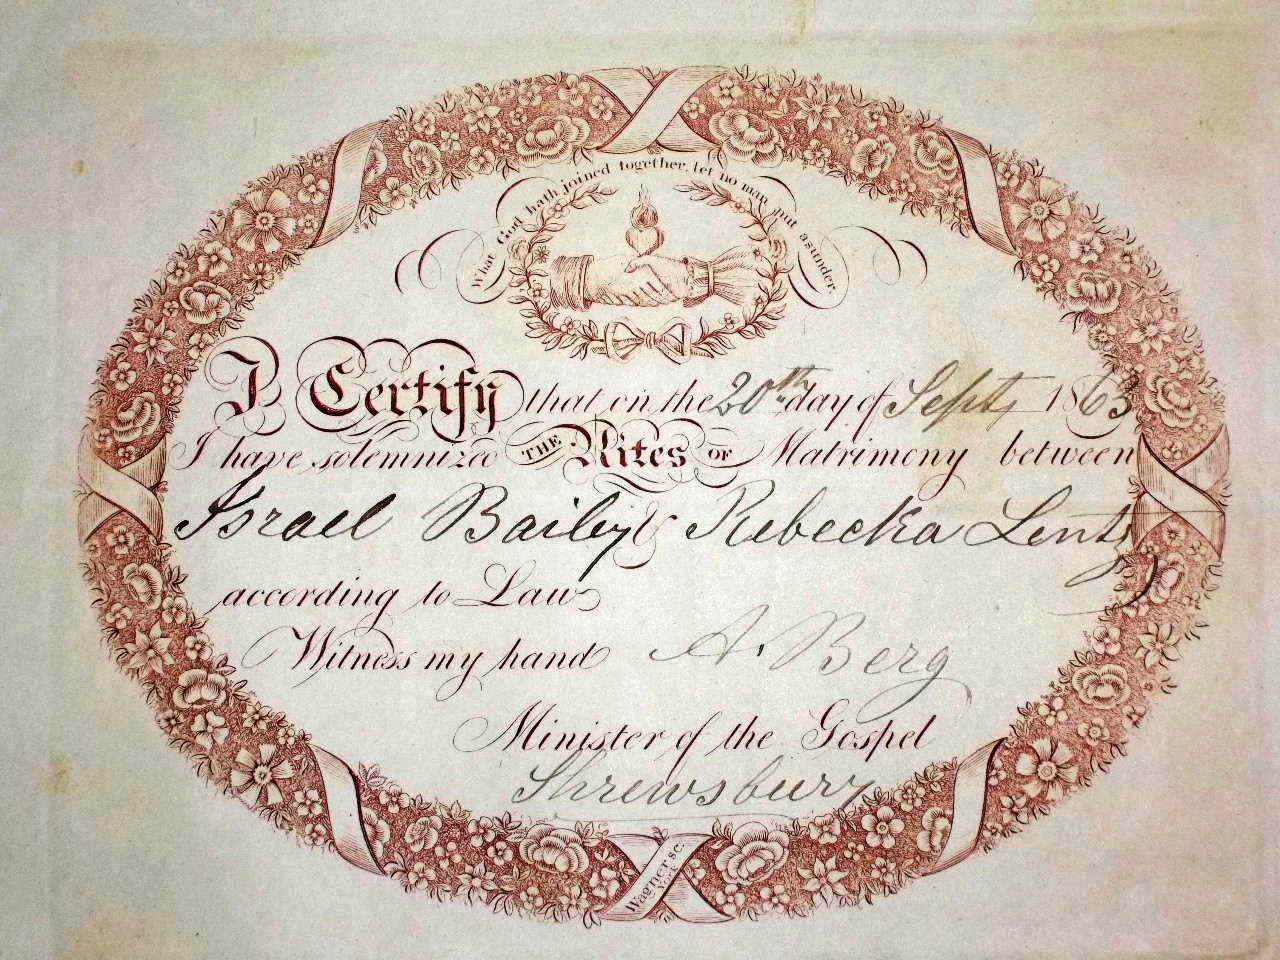 21 CHRIST LUTHERAN EARLY MARRIAGE CERTIFICATE